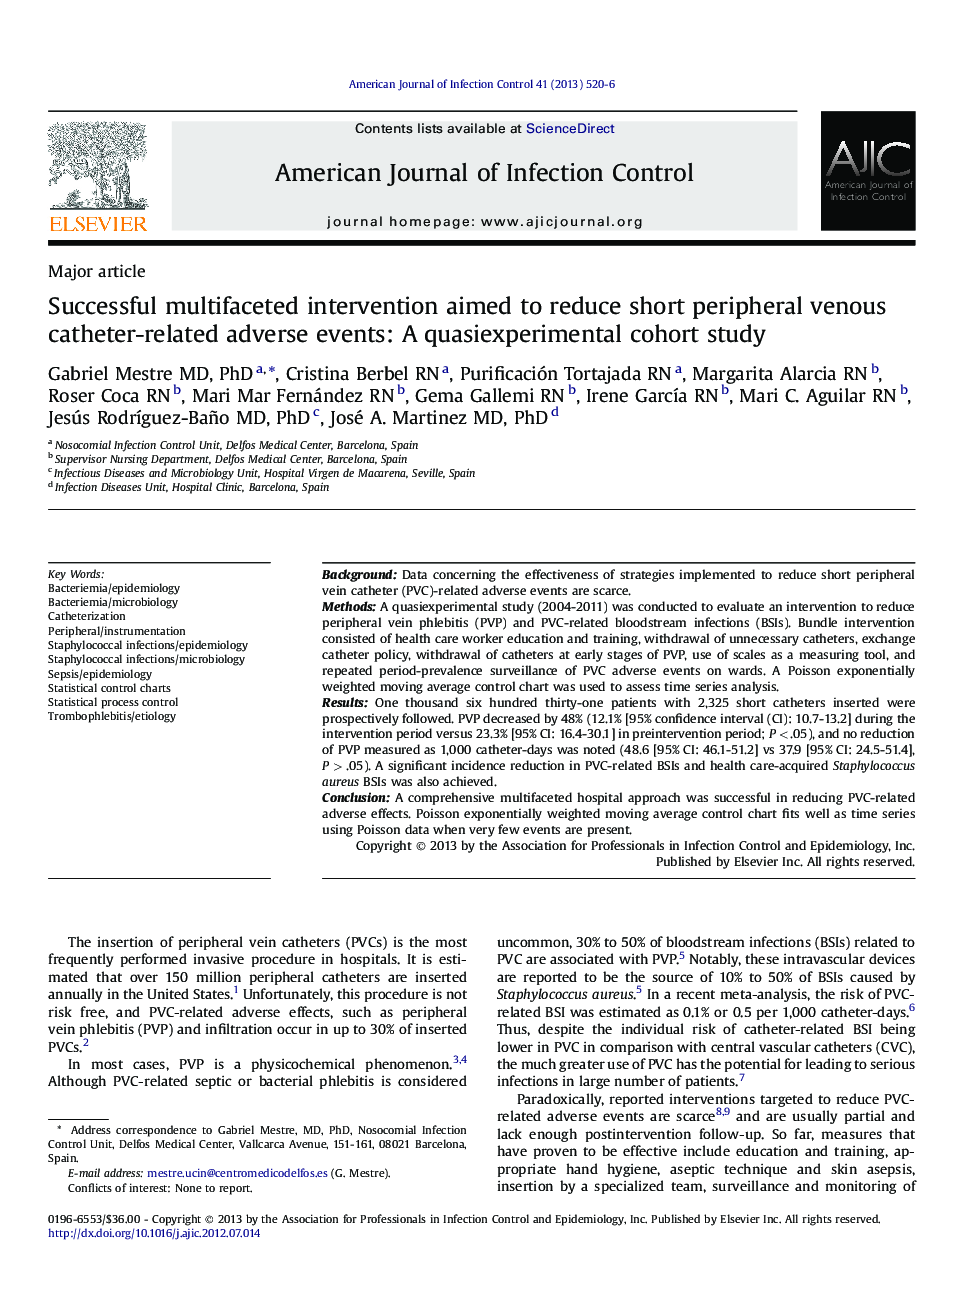 Successful multifaceted intervention aimed to reduce short peripheral venous catheter-related adverse events: A quasiexperimental cohort study 